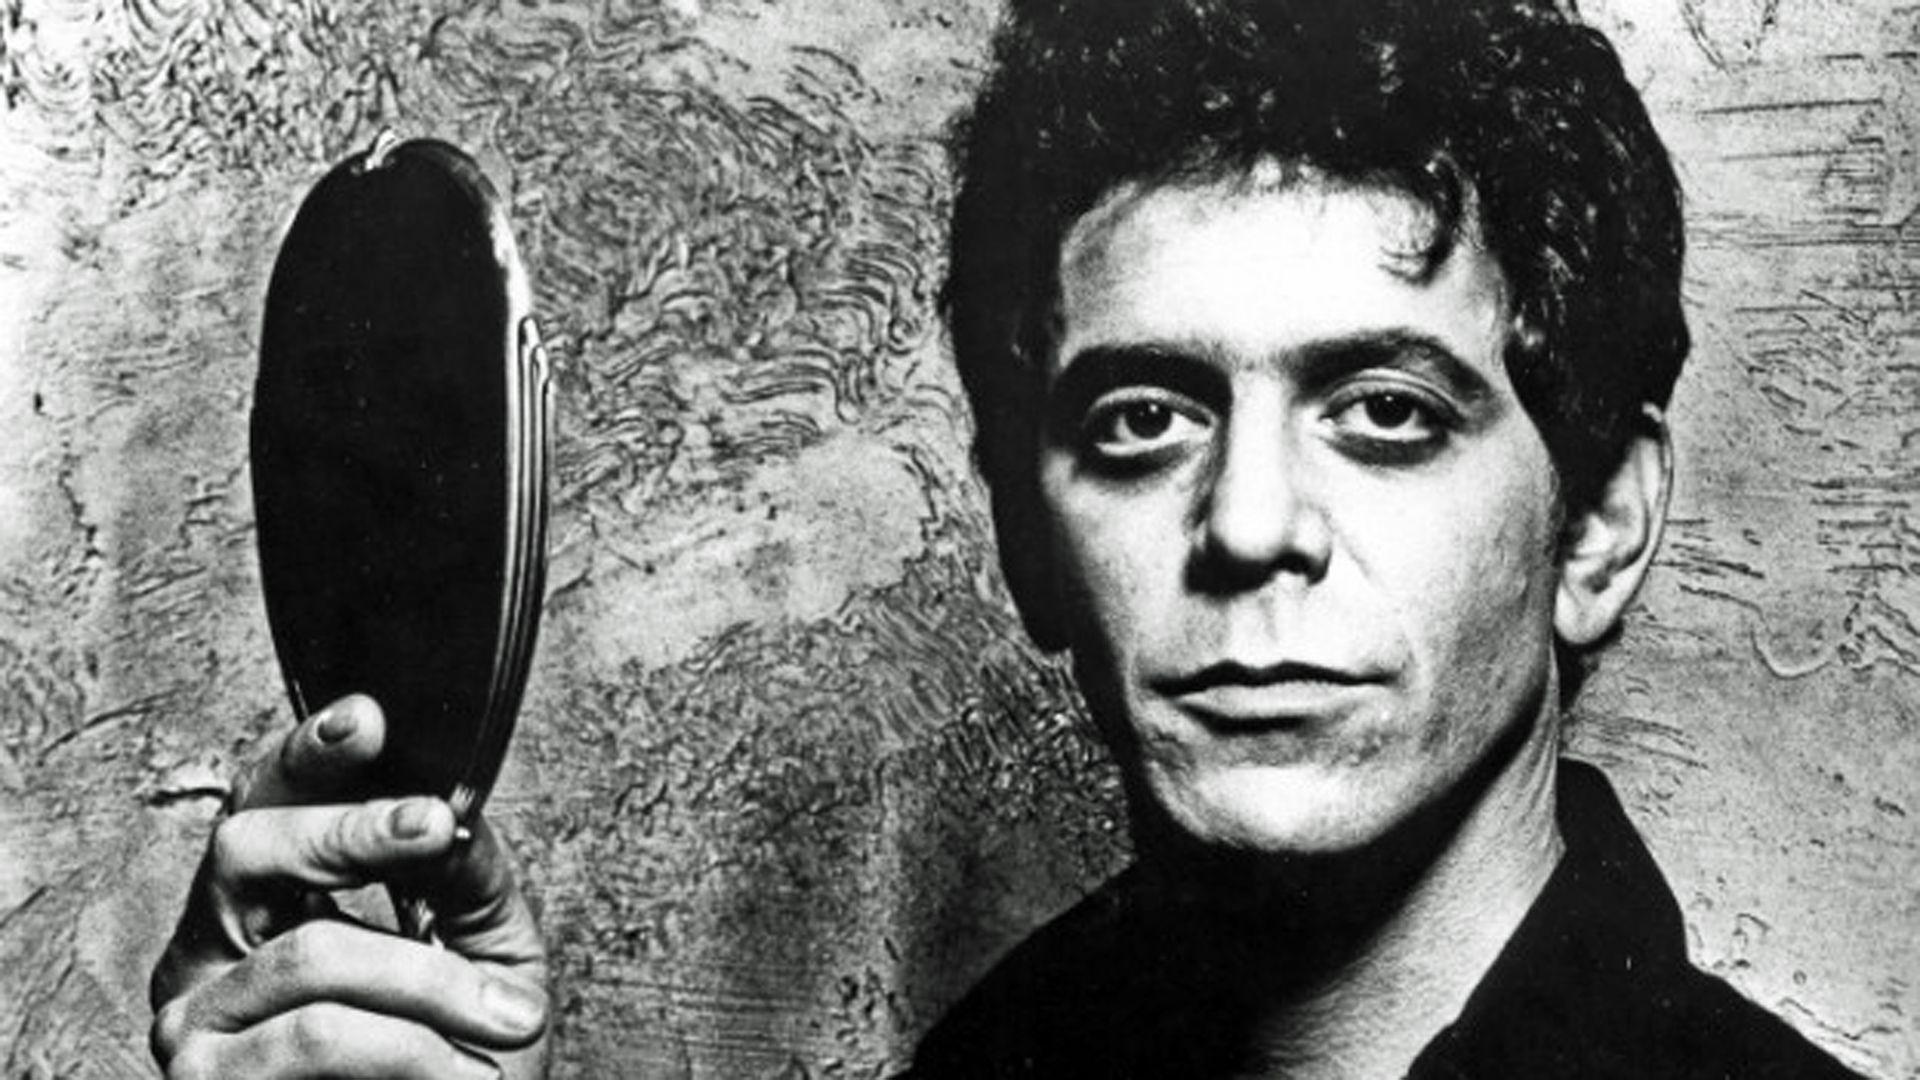 Lou Reed: “I thought the Beatles were garbage”, News